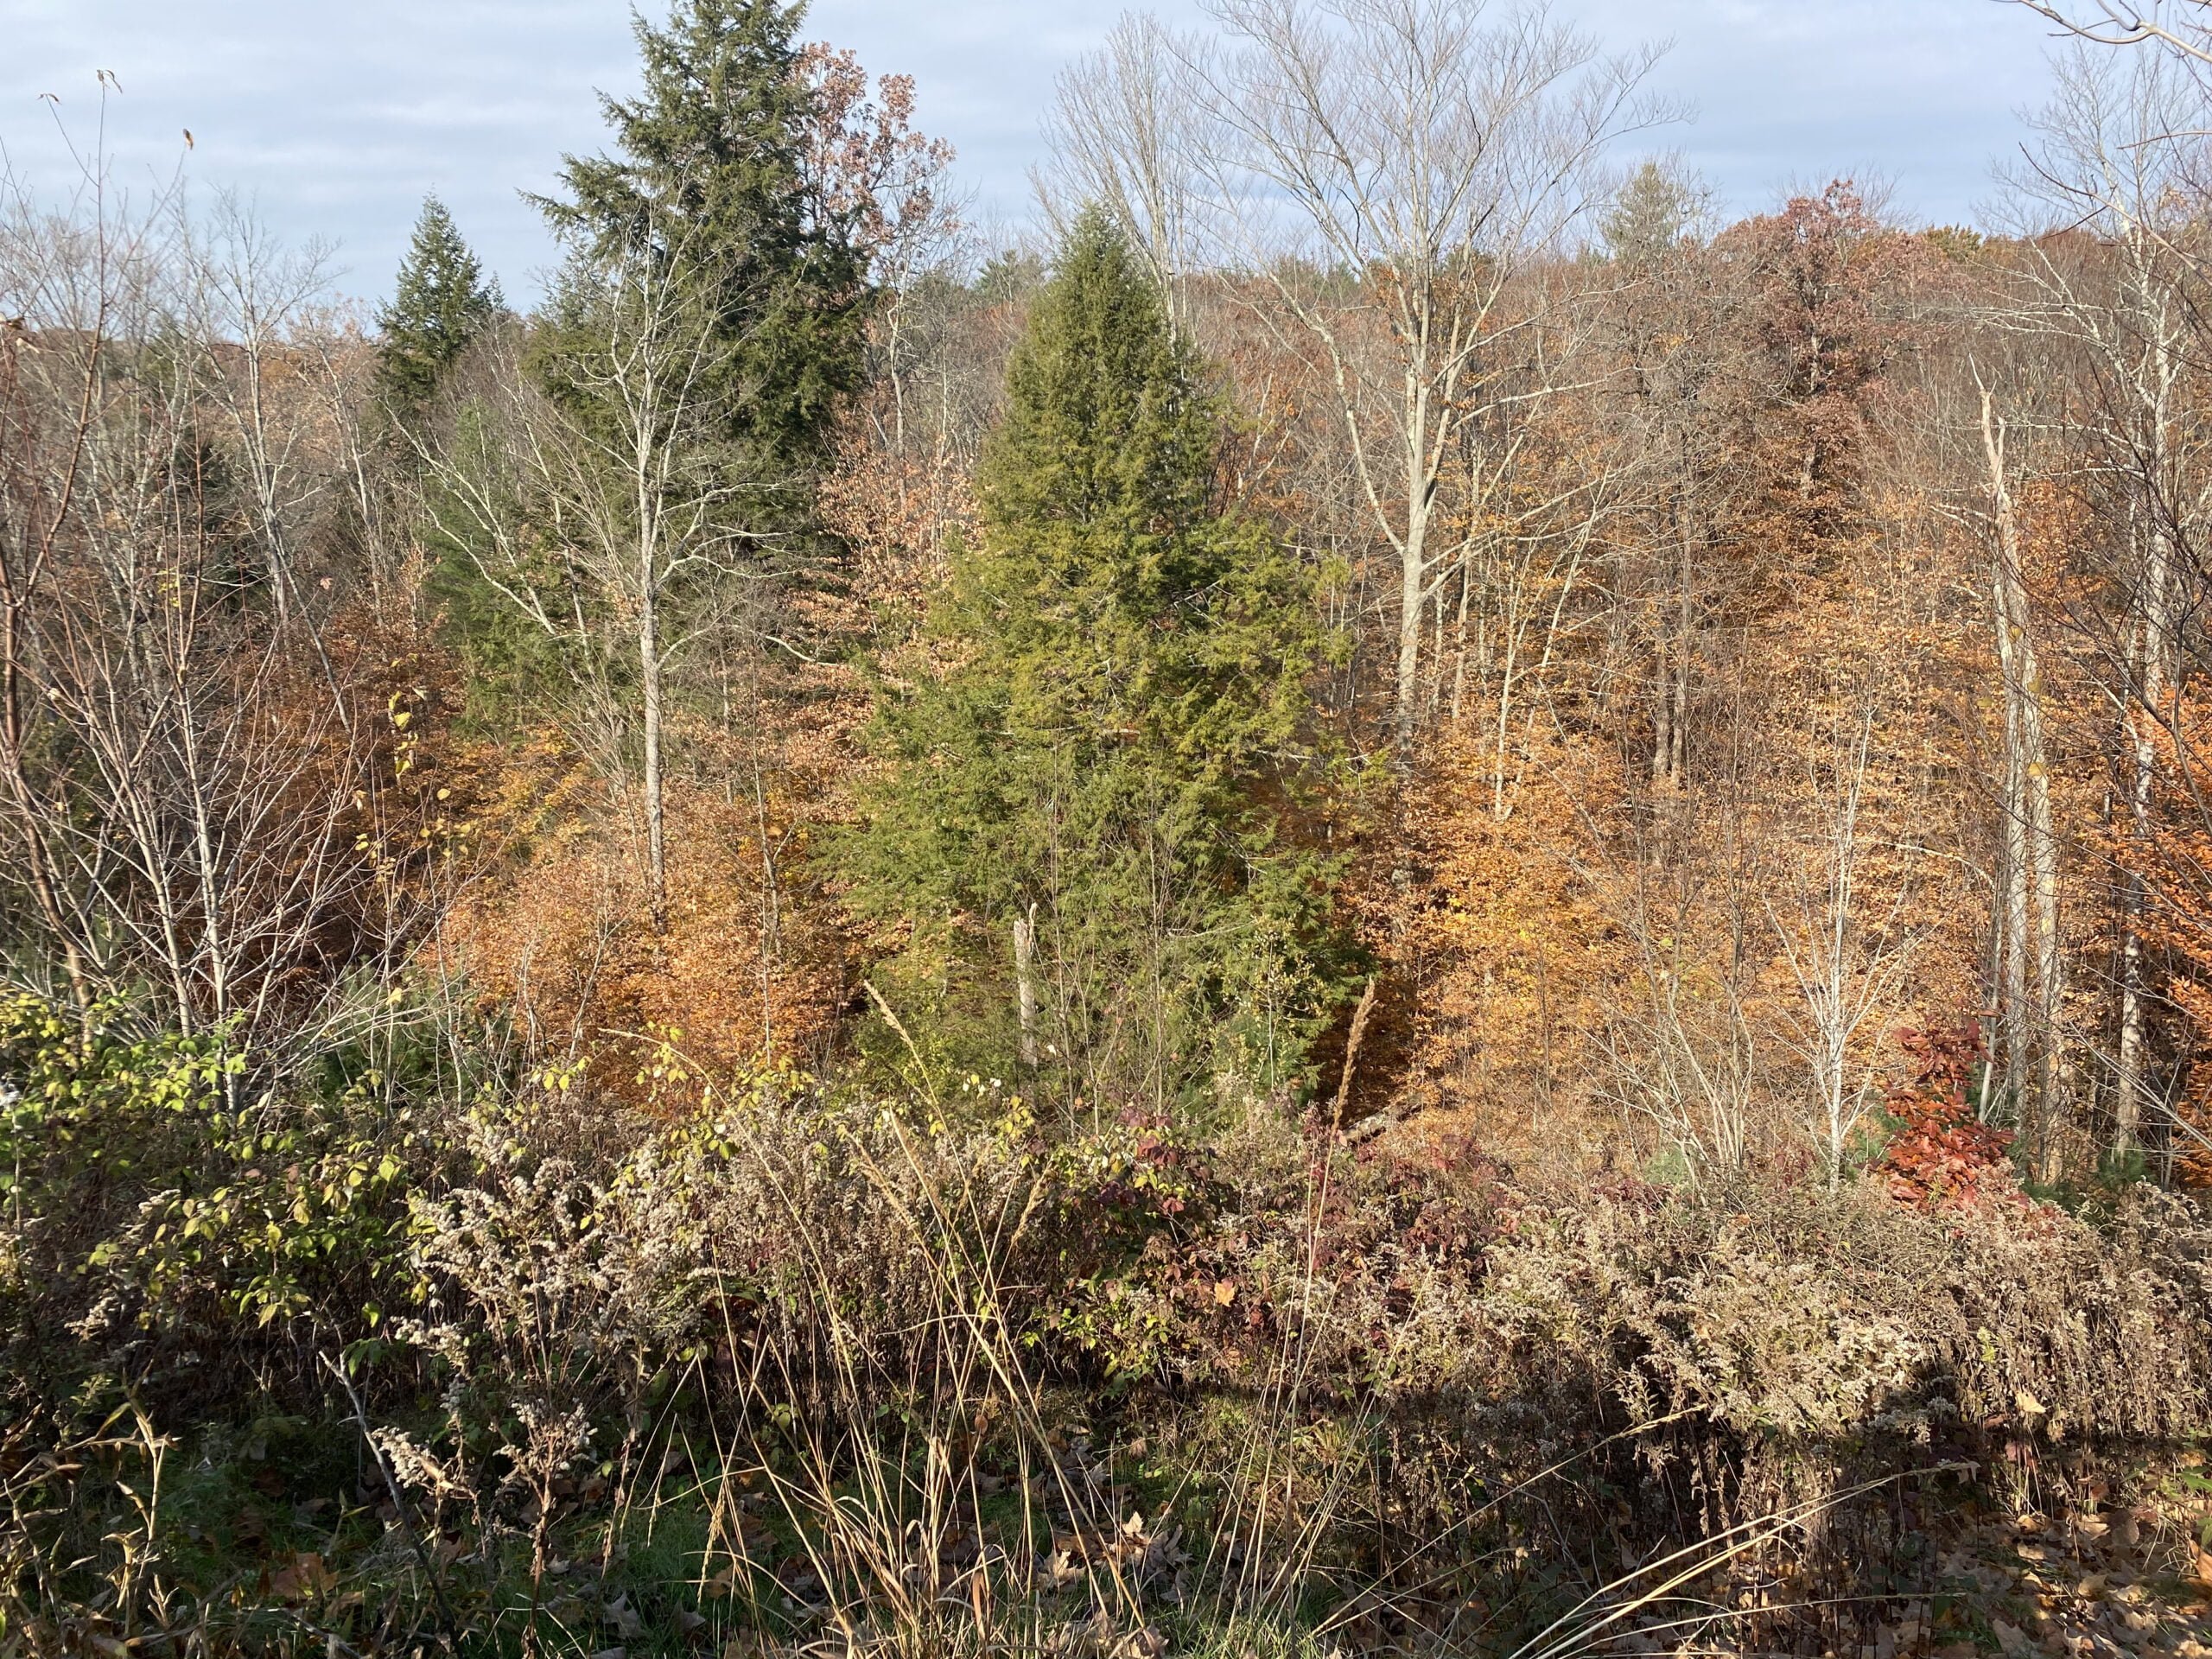 living among nature at elements luther forest with 100 acre woods in malta ny scenic overlook